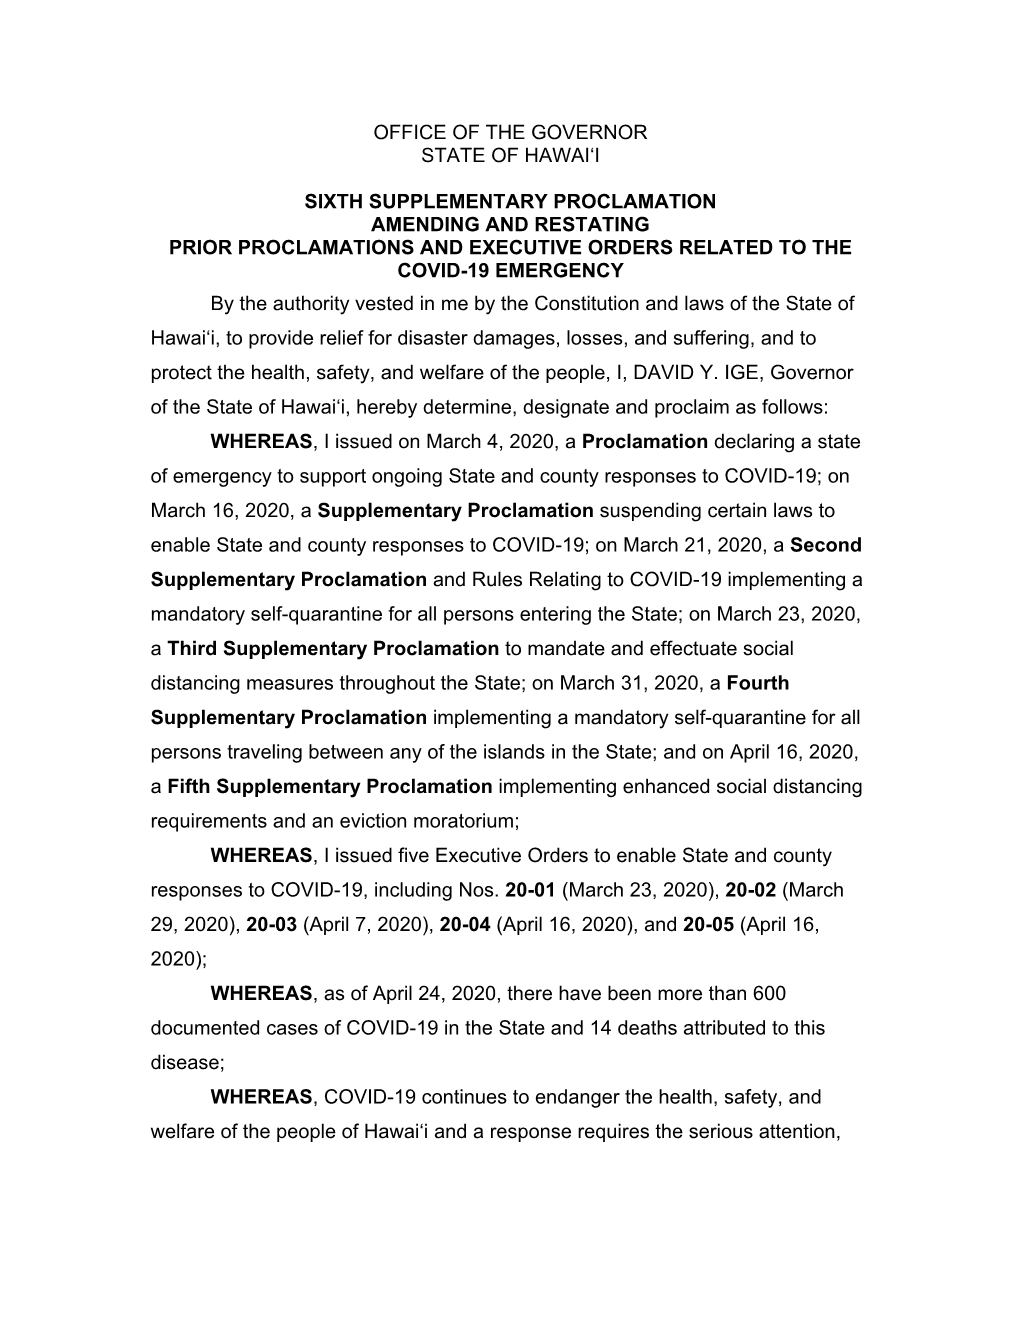 April 25, 2020—Sixth Supplementary Proclamation for COVID-19